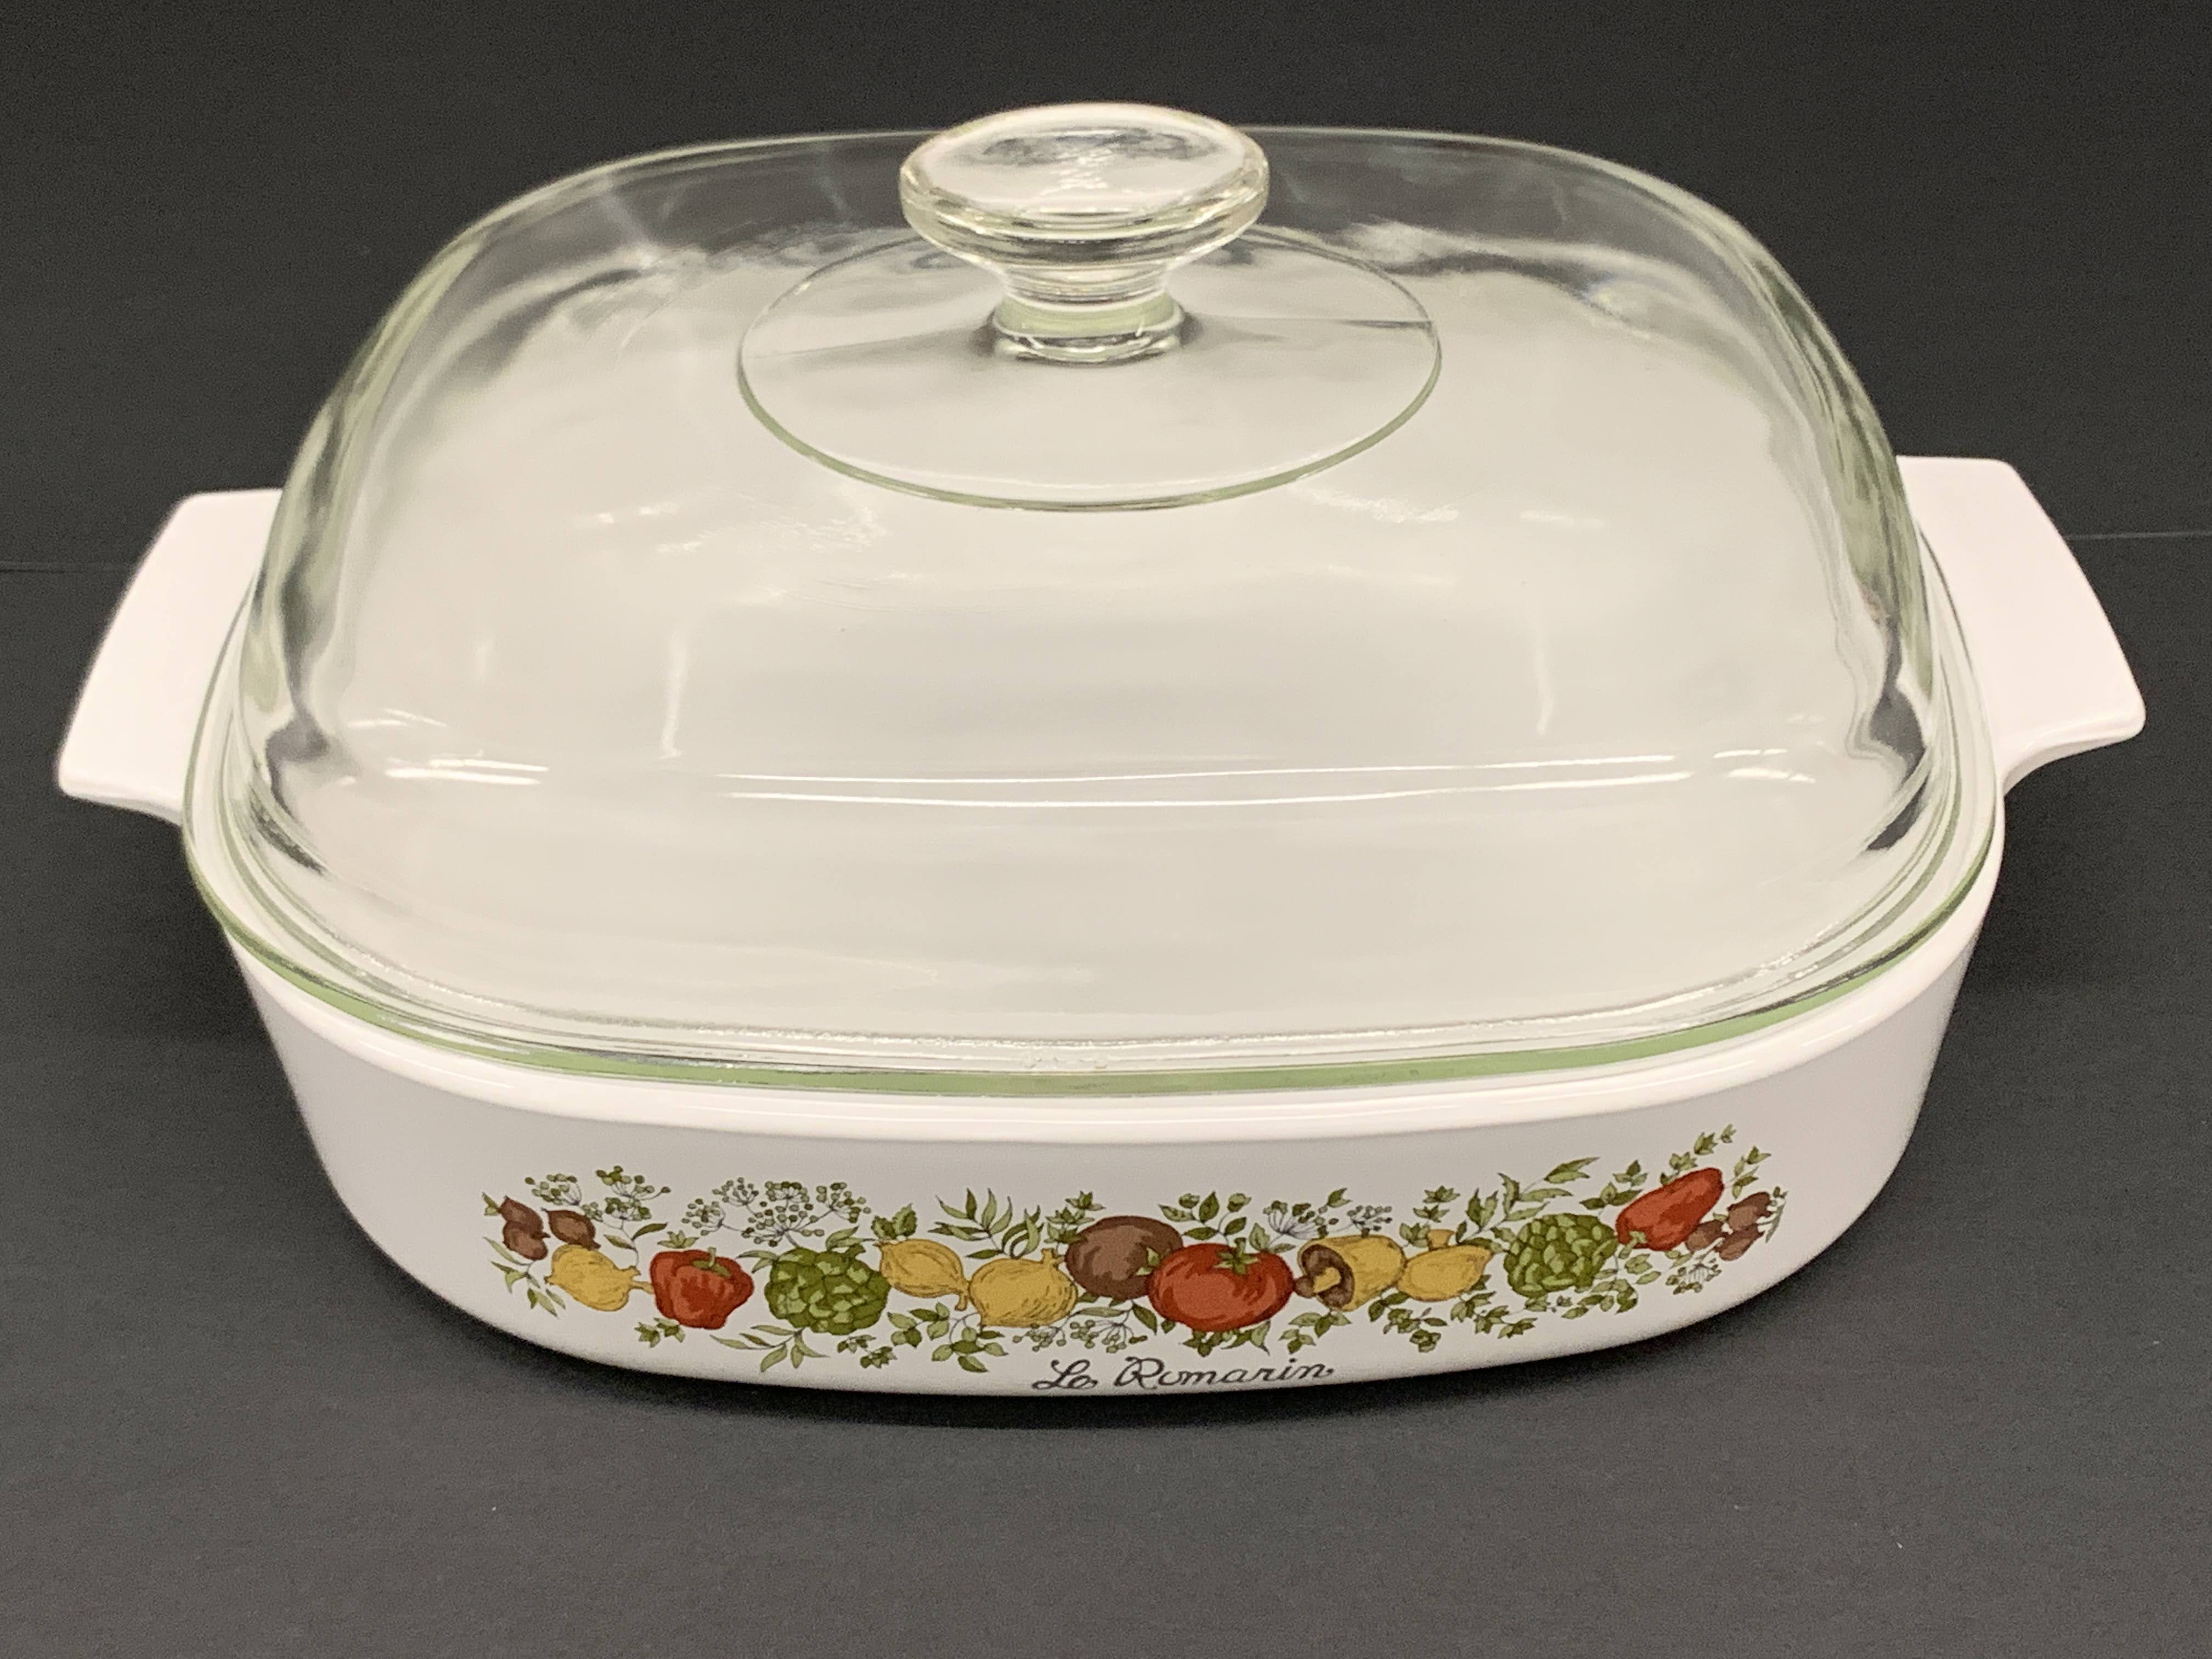 Spice Of Life 12 - Corning Ware Casserole - Square Shape With Lid